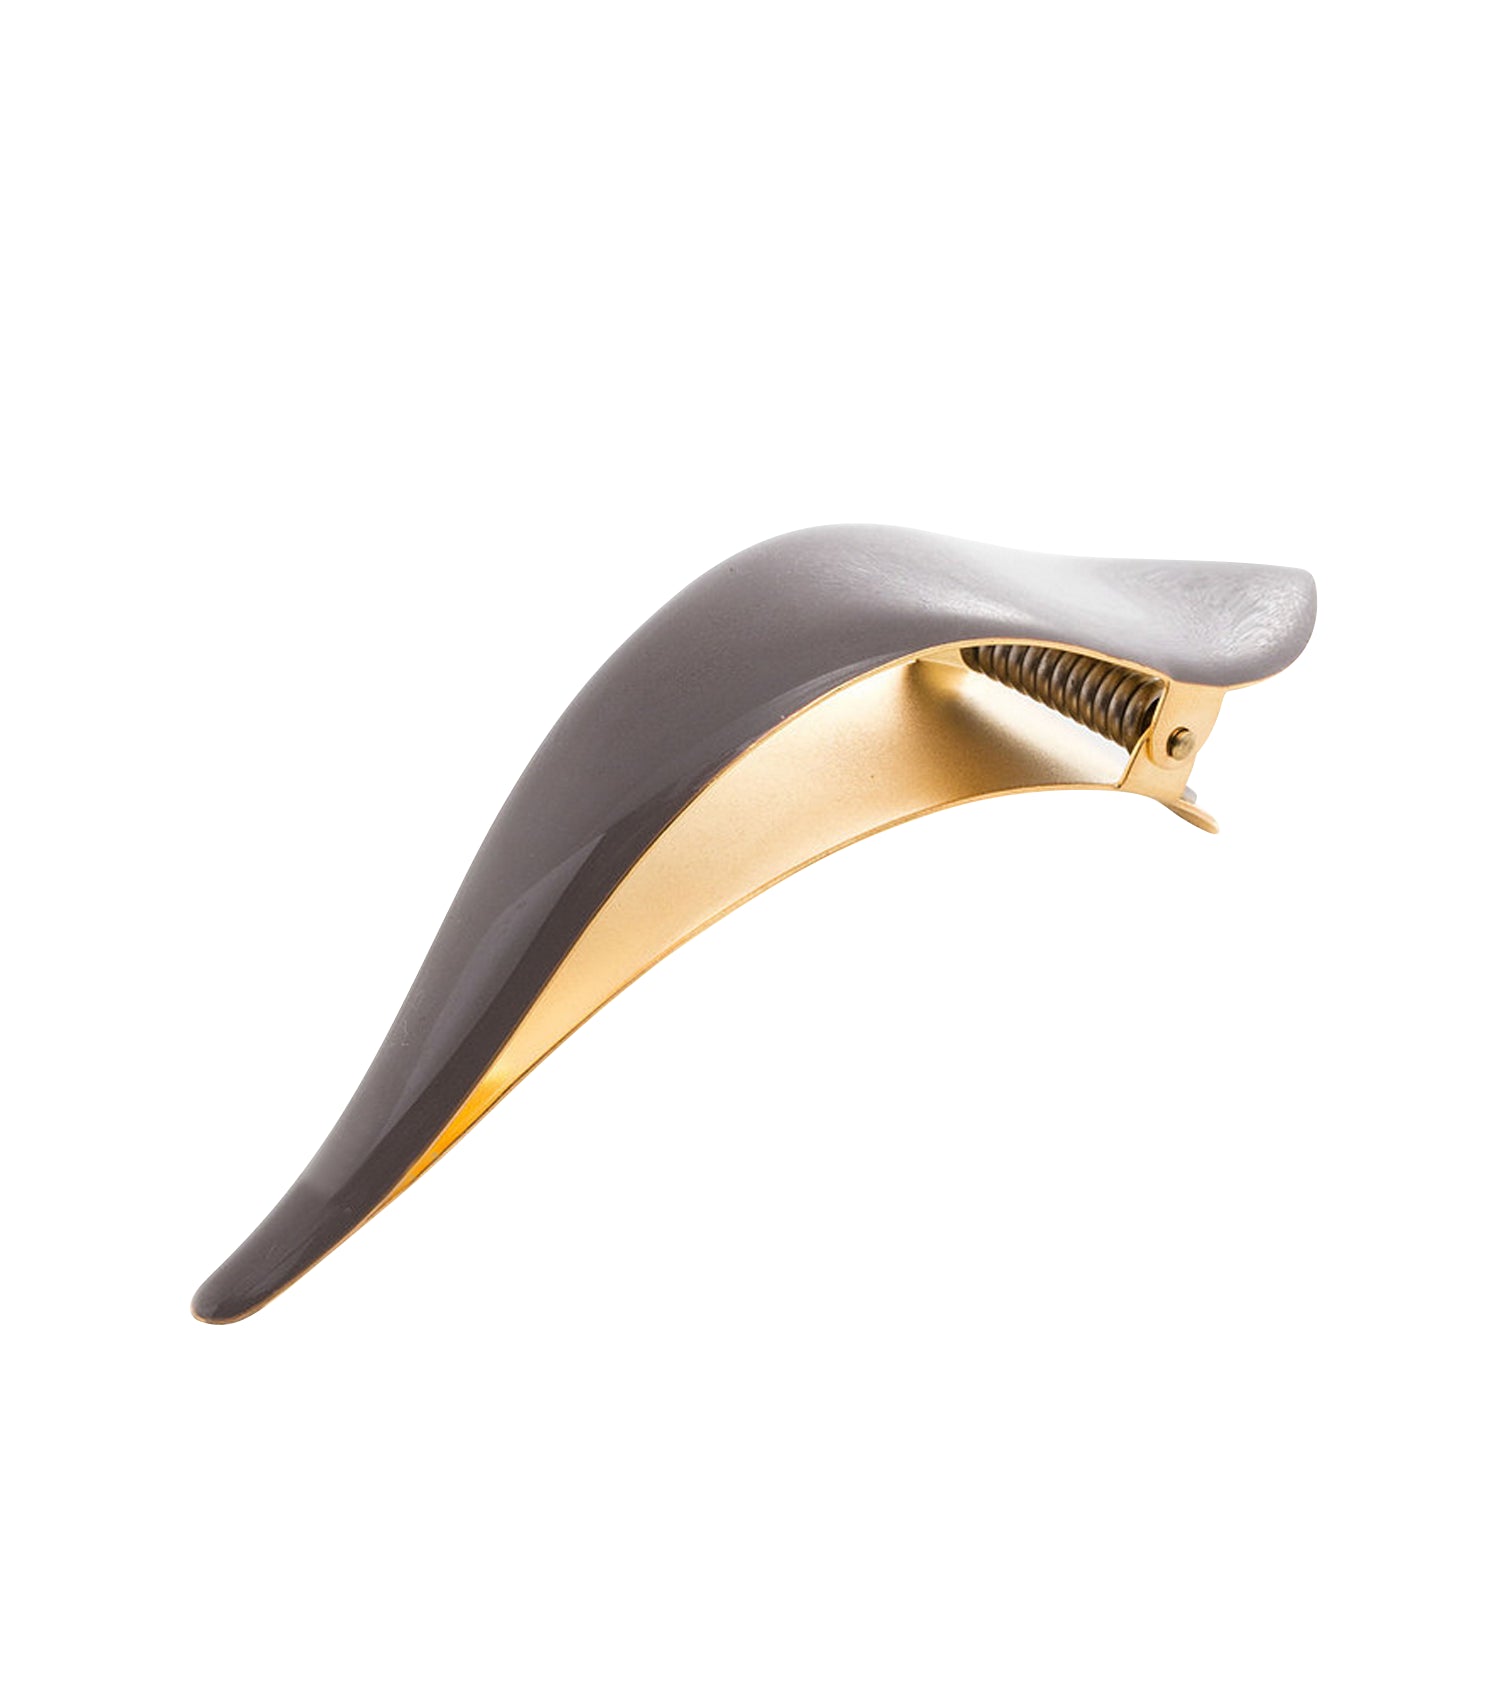 Ficcare Maximas Hair Clip in Sahara Stone Gray Enamel and Gold Plated